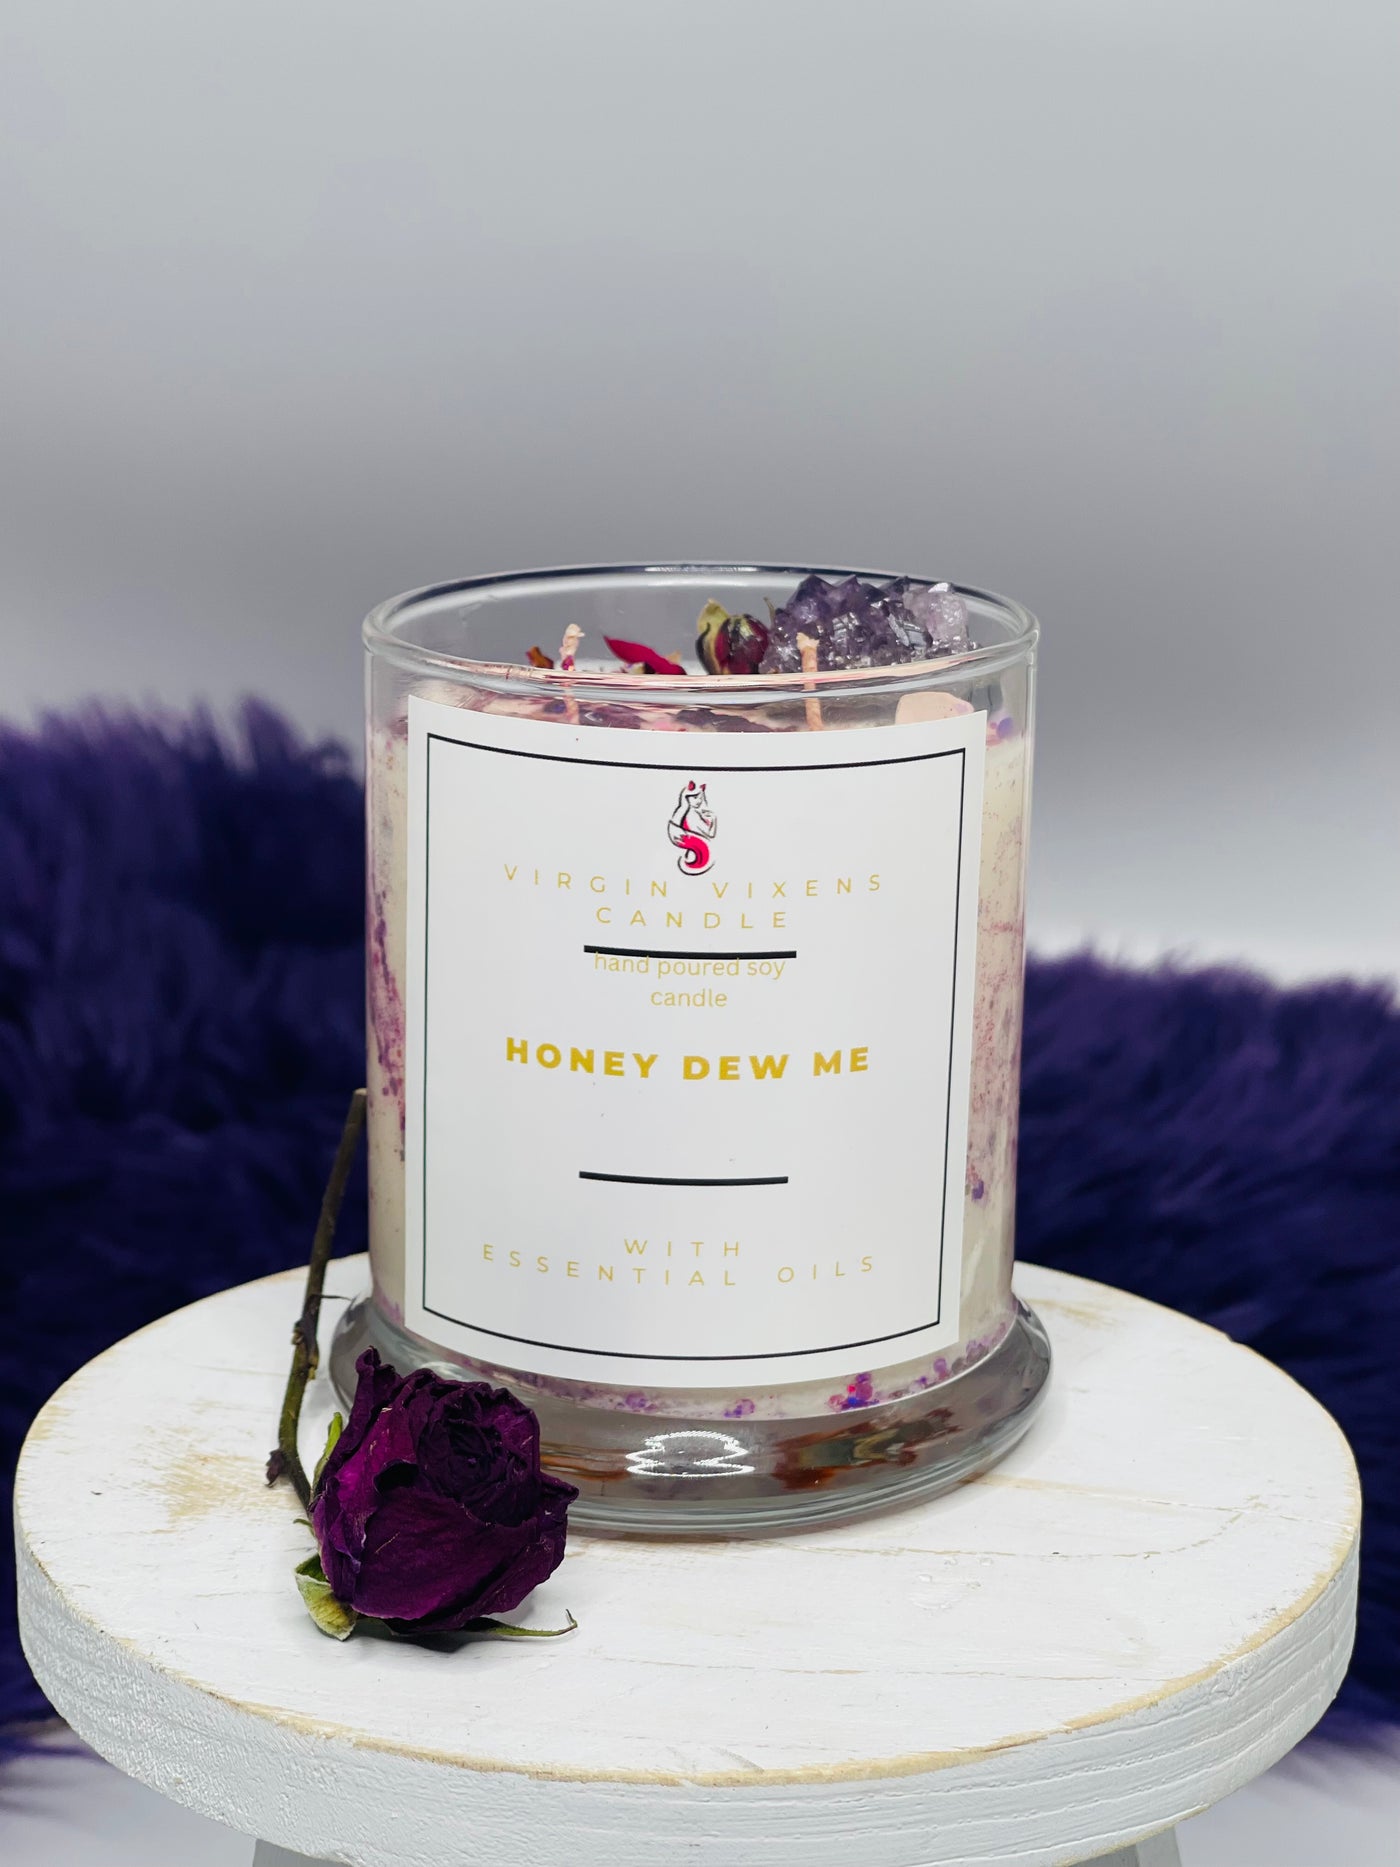 Experience the Feeling of Nostalgia with our "Honey Dew Me" Honey Suckle Scented Candle